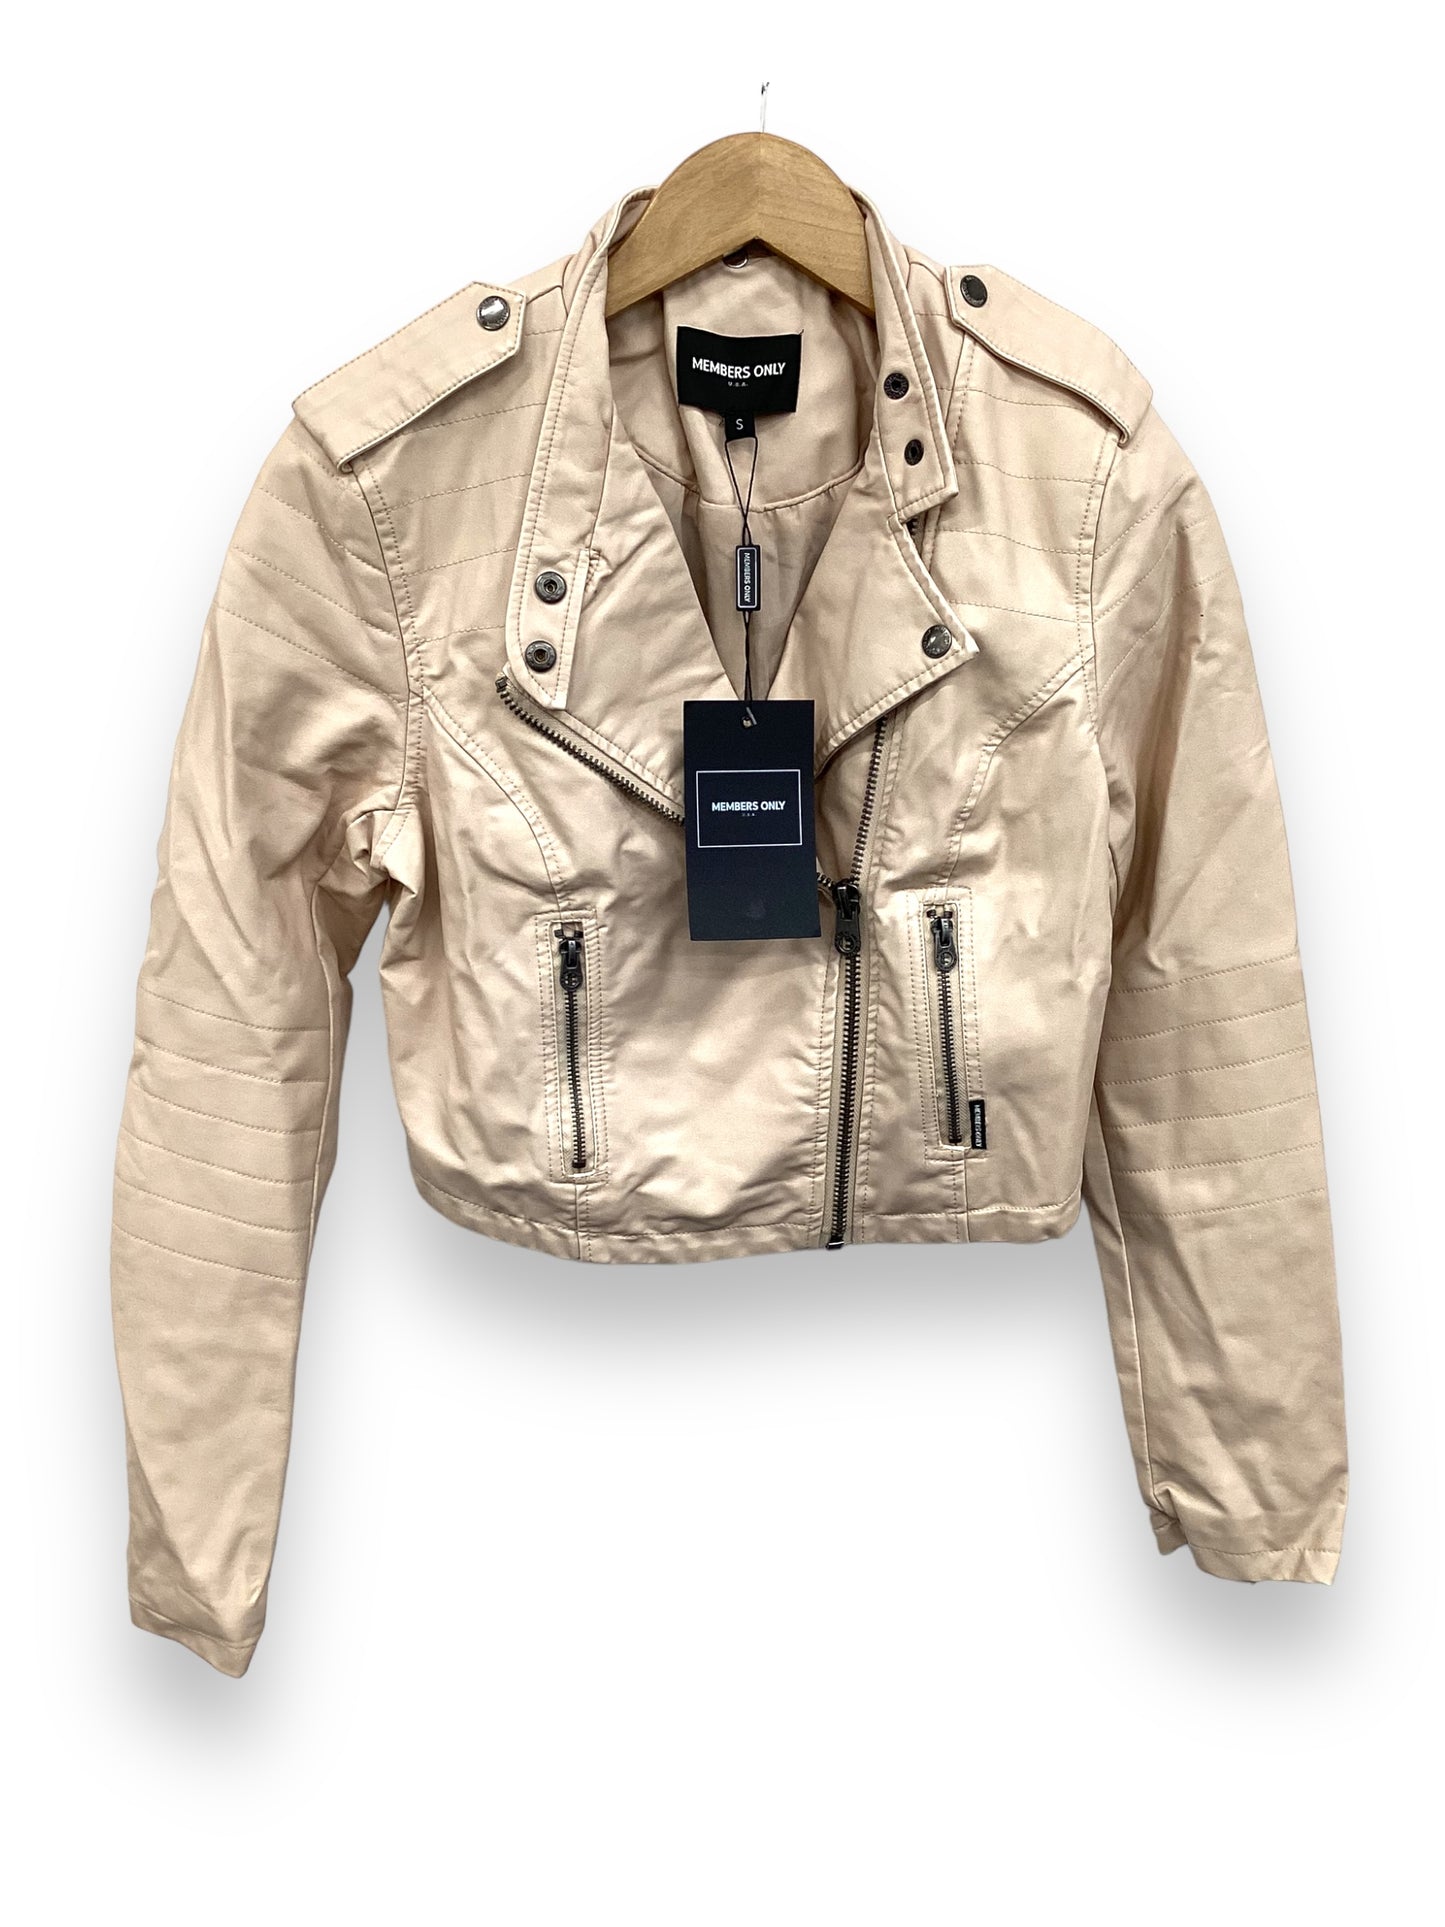 Jacket Moto By Clothes Mentor  Size: S